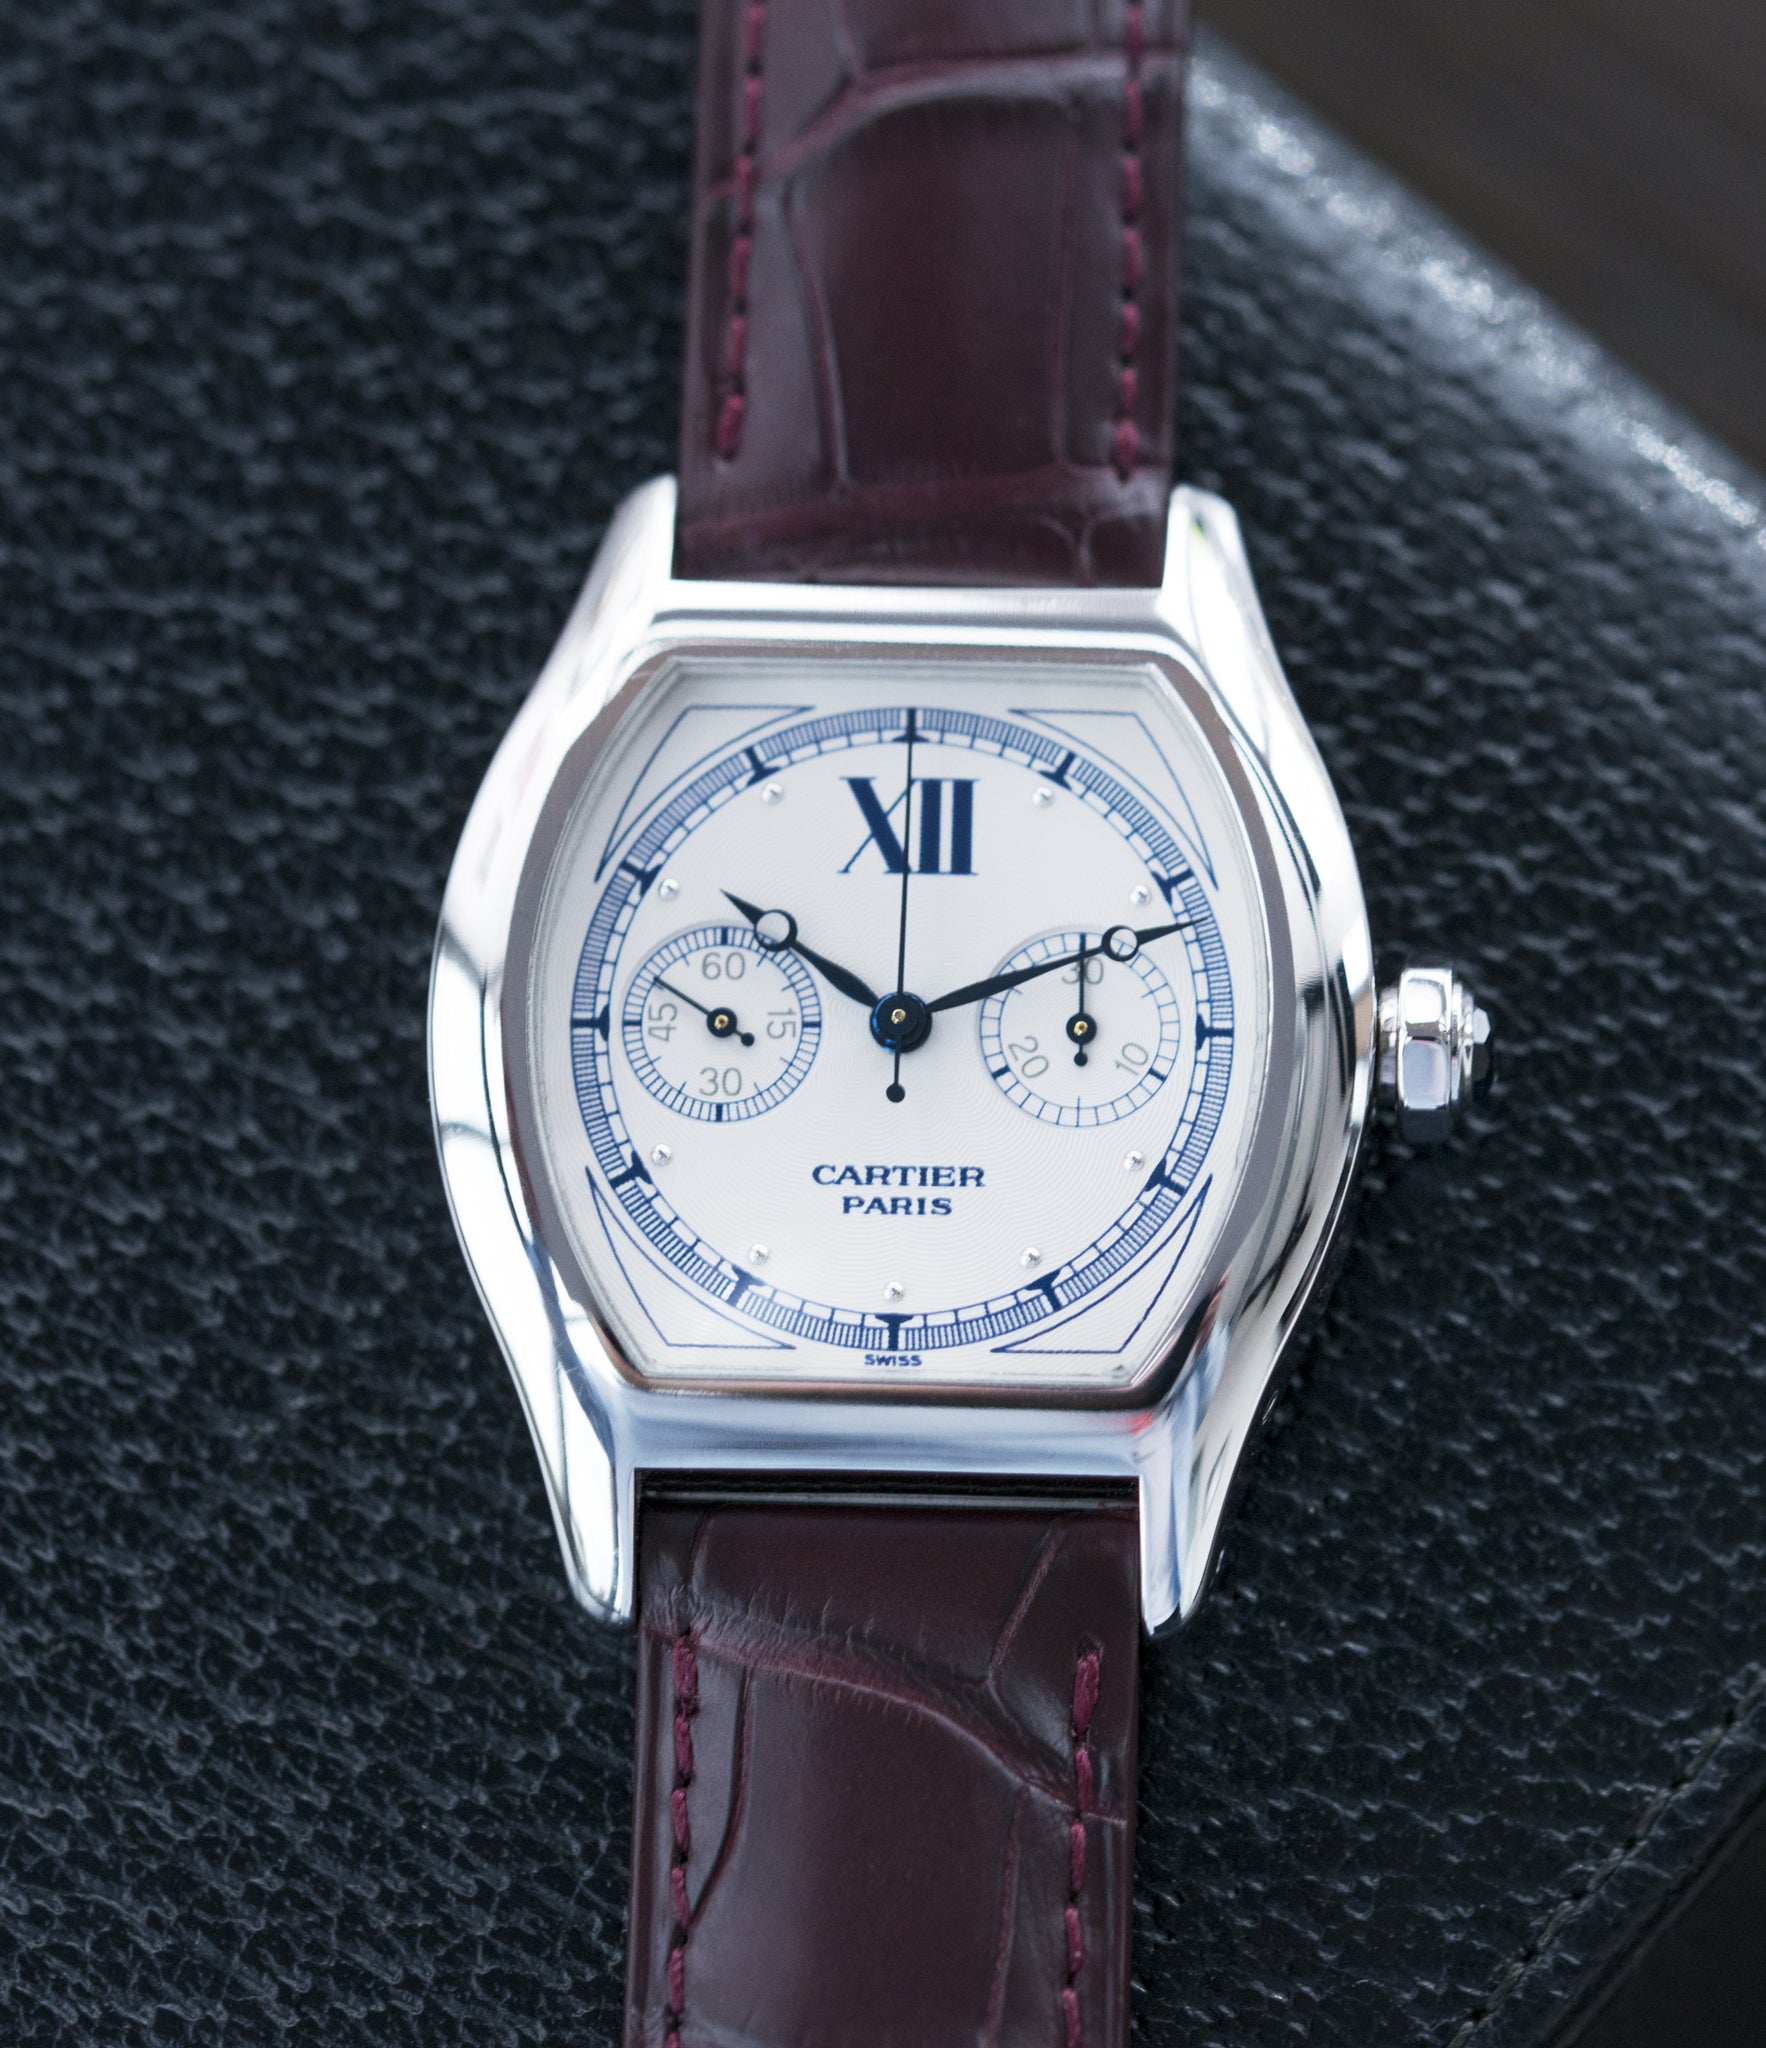 buying Cartier Monopusher Monopoussoir ref. 2396 white gold dress watch with THA ebauche for sale online at A Collected Man London UK specialist of rare watches